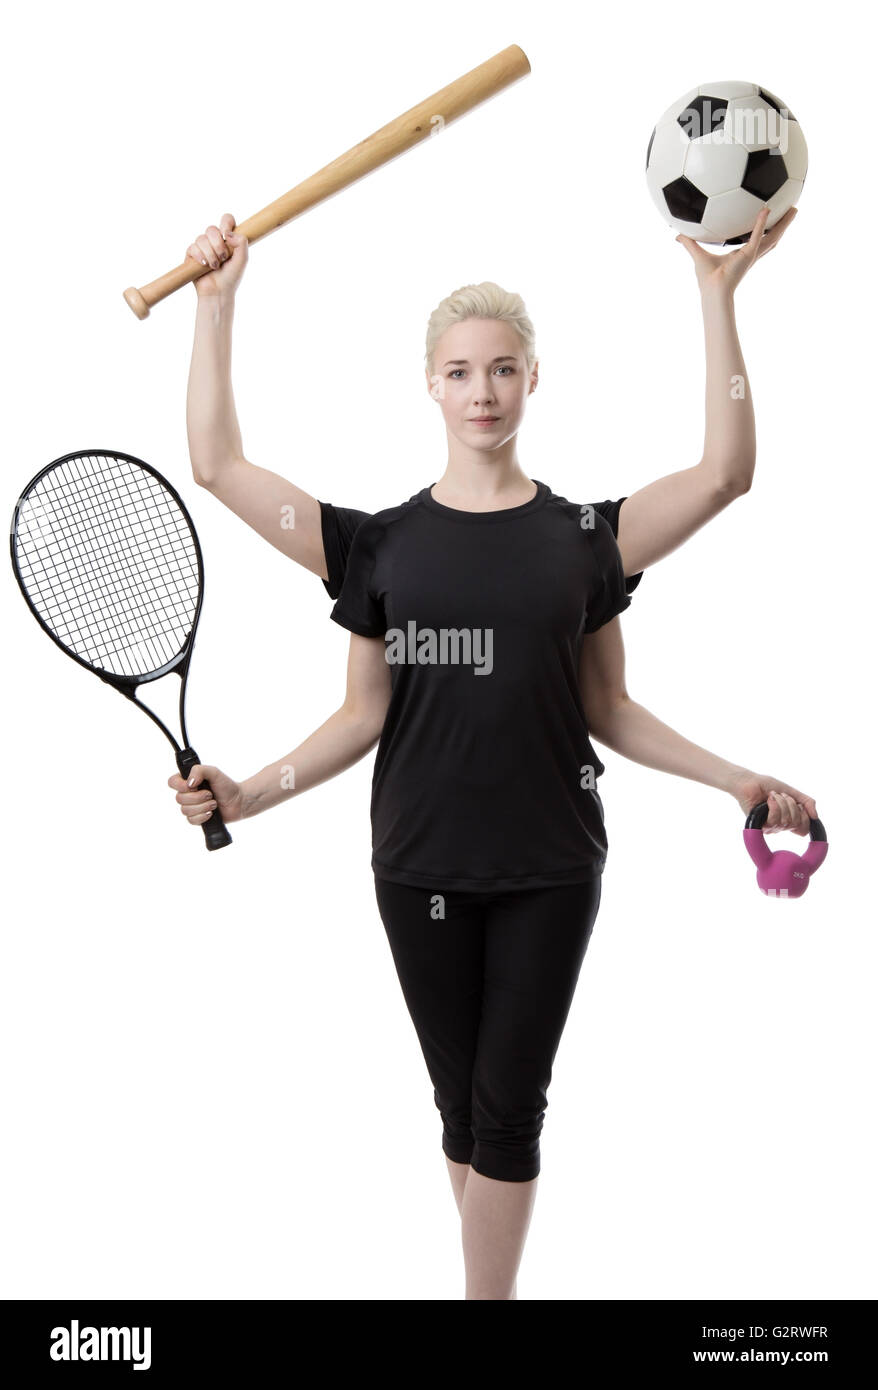 woman with four arms holding different sports items in each hand Stock  Photo - Alamy